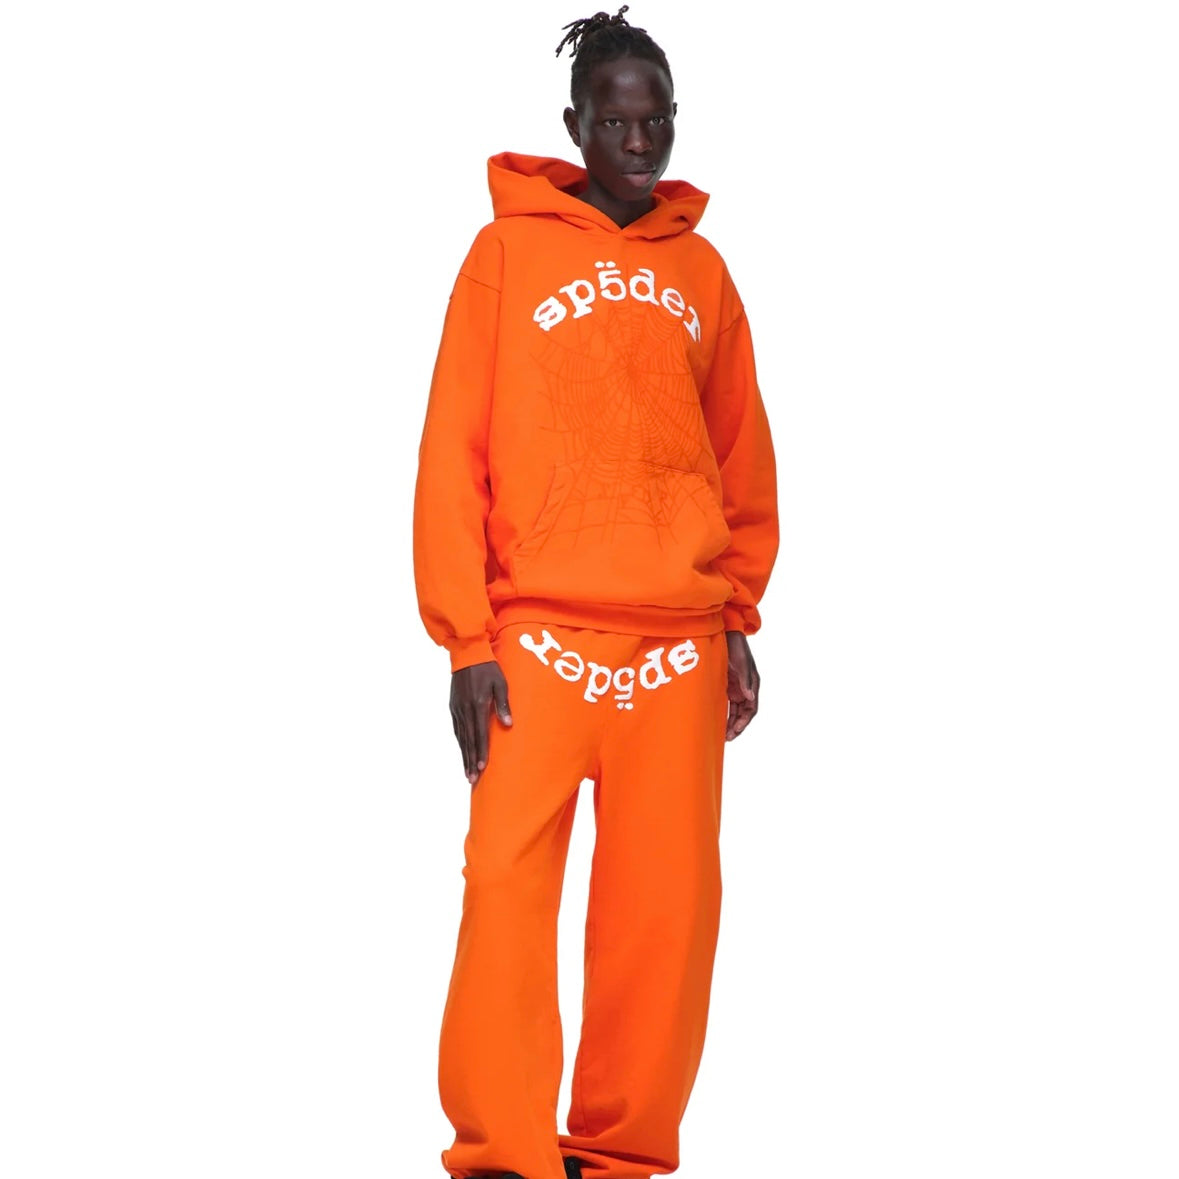 Sp5der Orange White Legacy Hoodie On Body Full Outfit